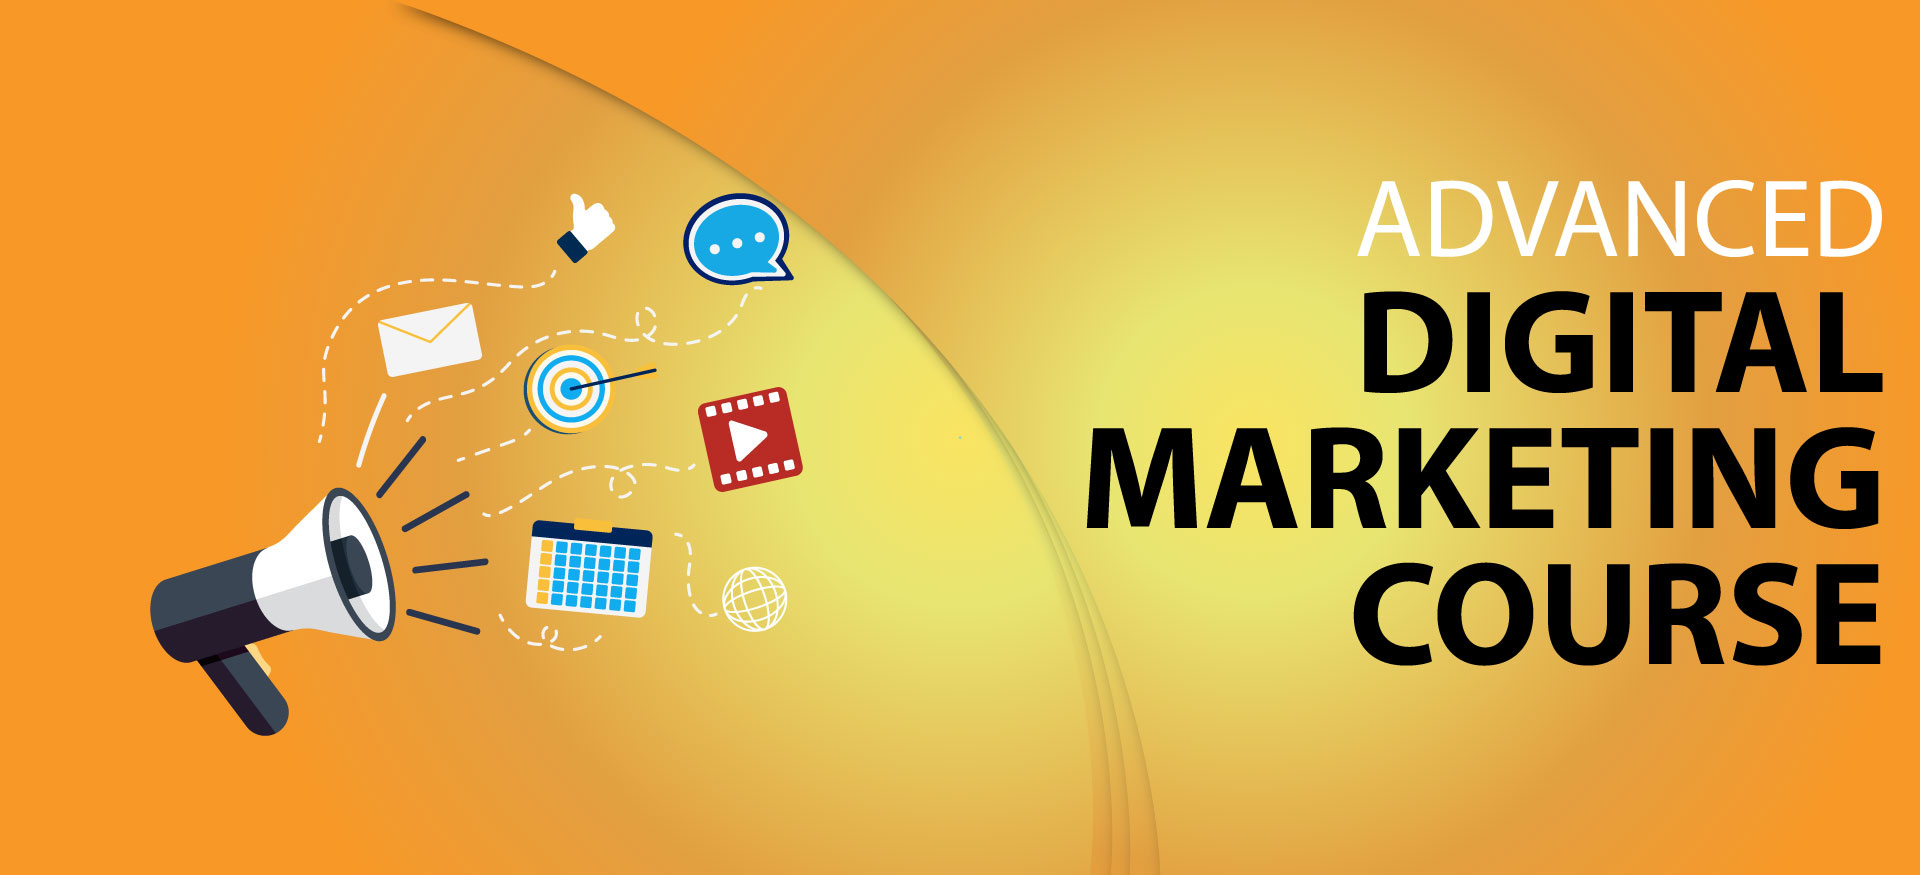  A graphic showing icons of digital marketing channels and the text 'Advanced Digital Marketing Course'.